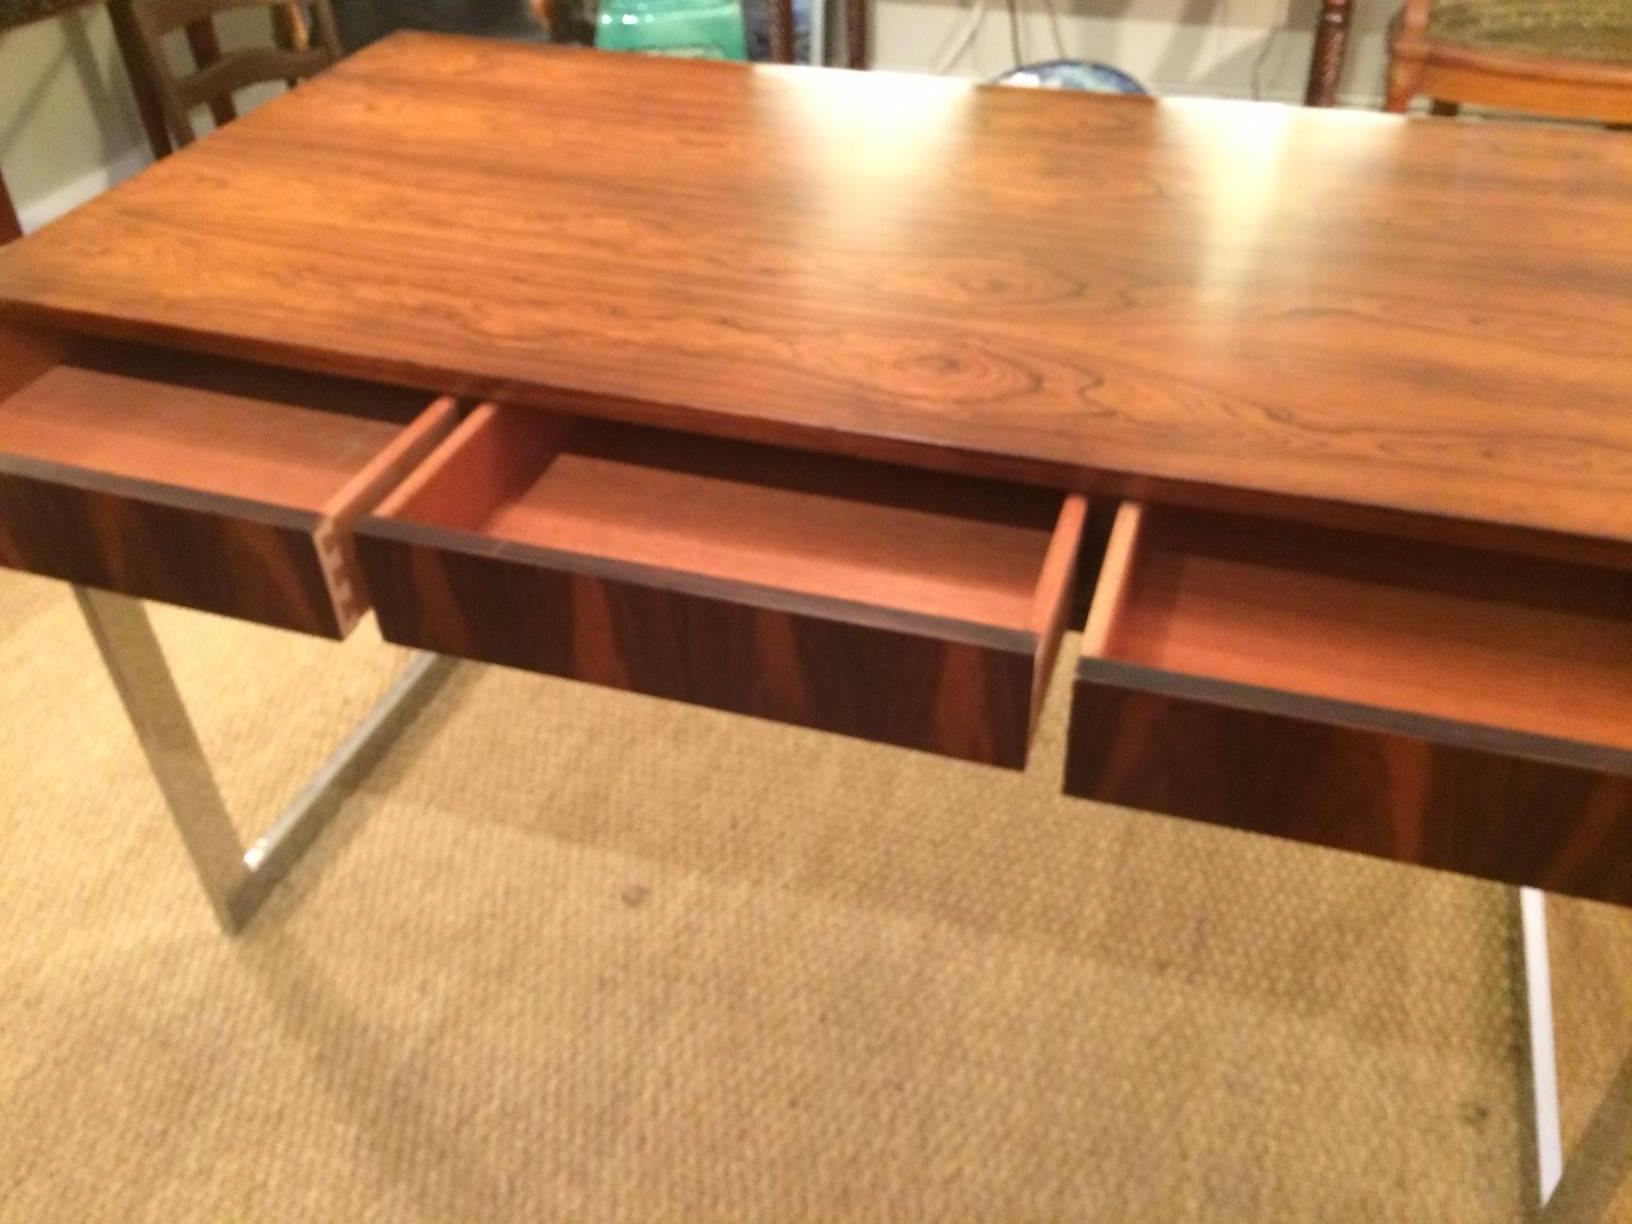 Rosewood veneer desk in the style of Milo Baughman, 1960s, with three working drawers resting on a chrome base connected by a cross-stretcher. Nice low lustre finish. Finished on the back so it can float in a room. 
